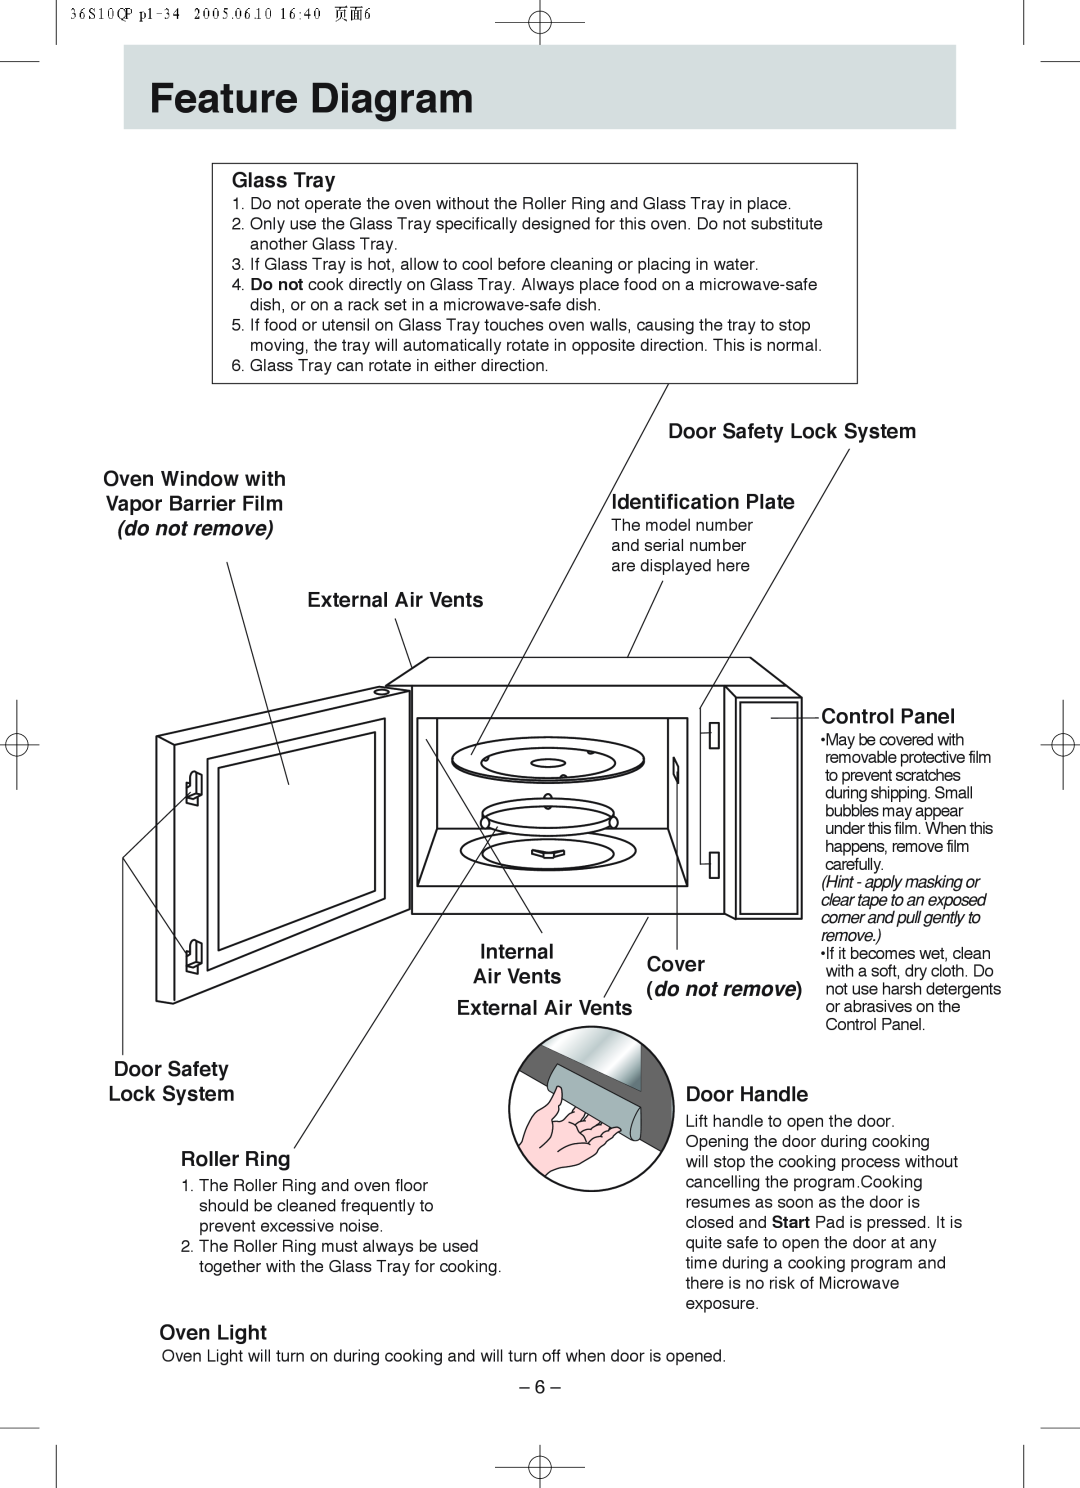 Panasonic NN-S215, NN-S235 Feature Diagram, Glass Tray, Door Safety Lock System Identification Plate, Cover, Door Handle 